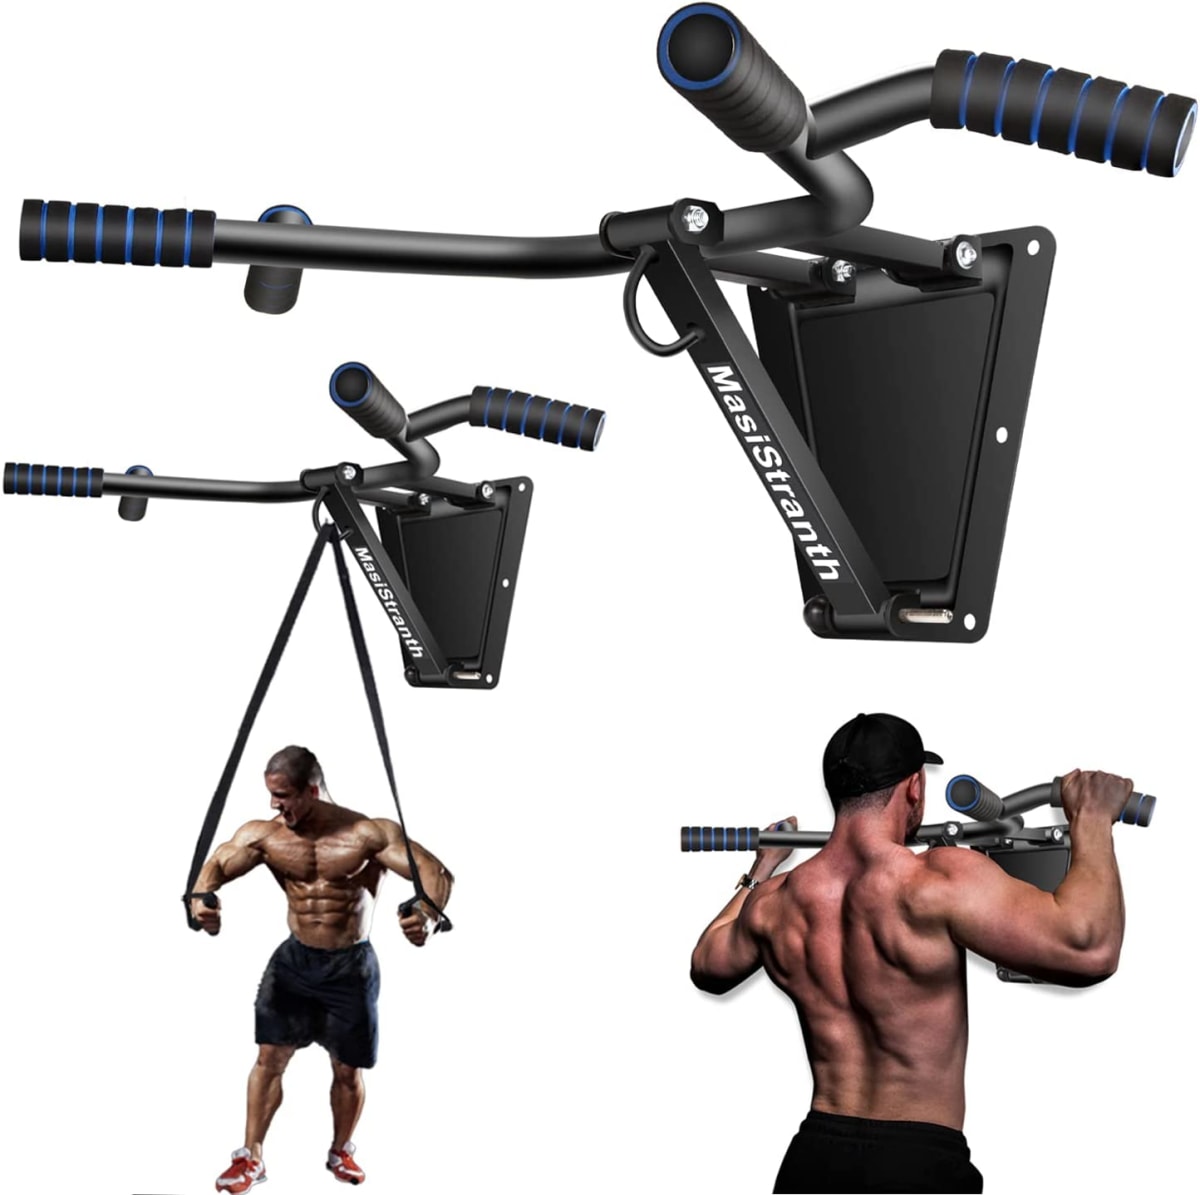 Multifunctional Wall Mounted Pull Up Bar, Foldable Chin Up Bar for Crossfit Training, Home Gym Workout Strength Training Equipment With Pull Up Bands